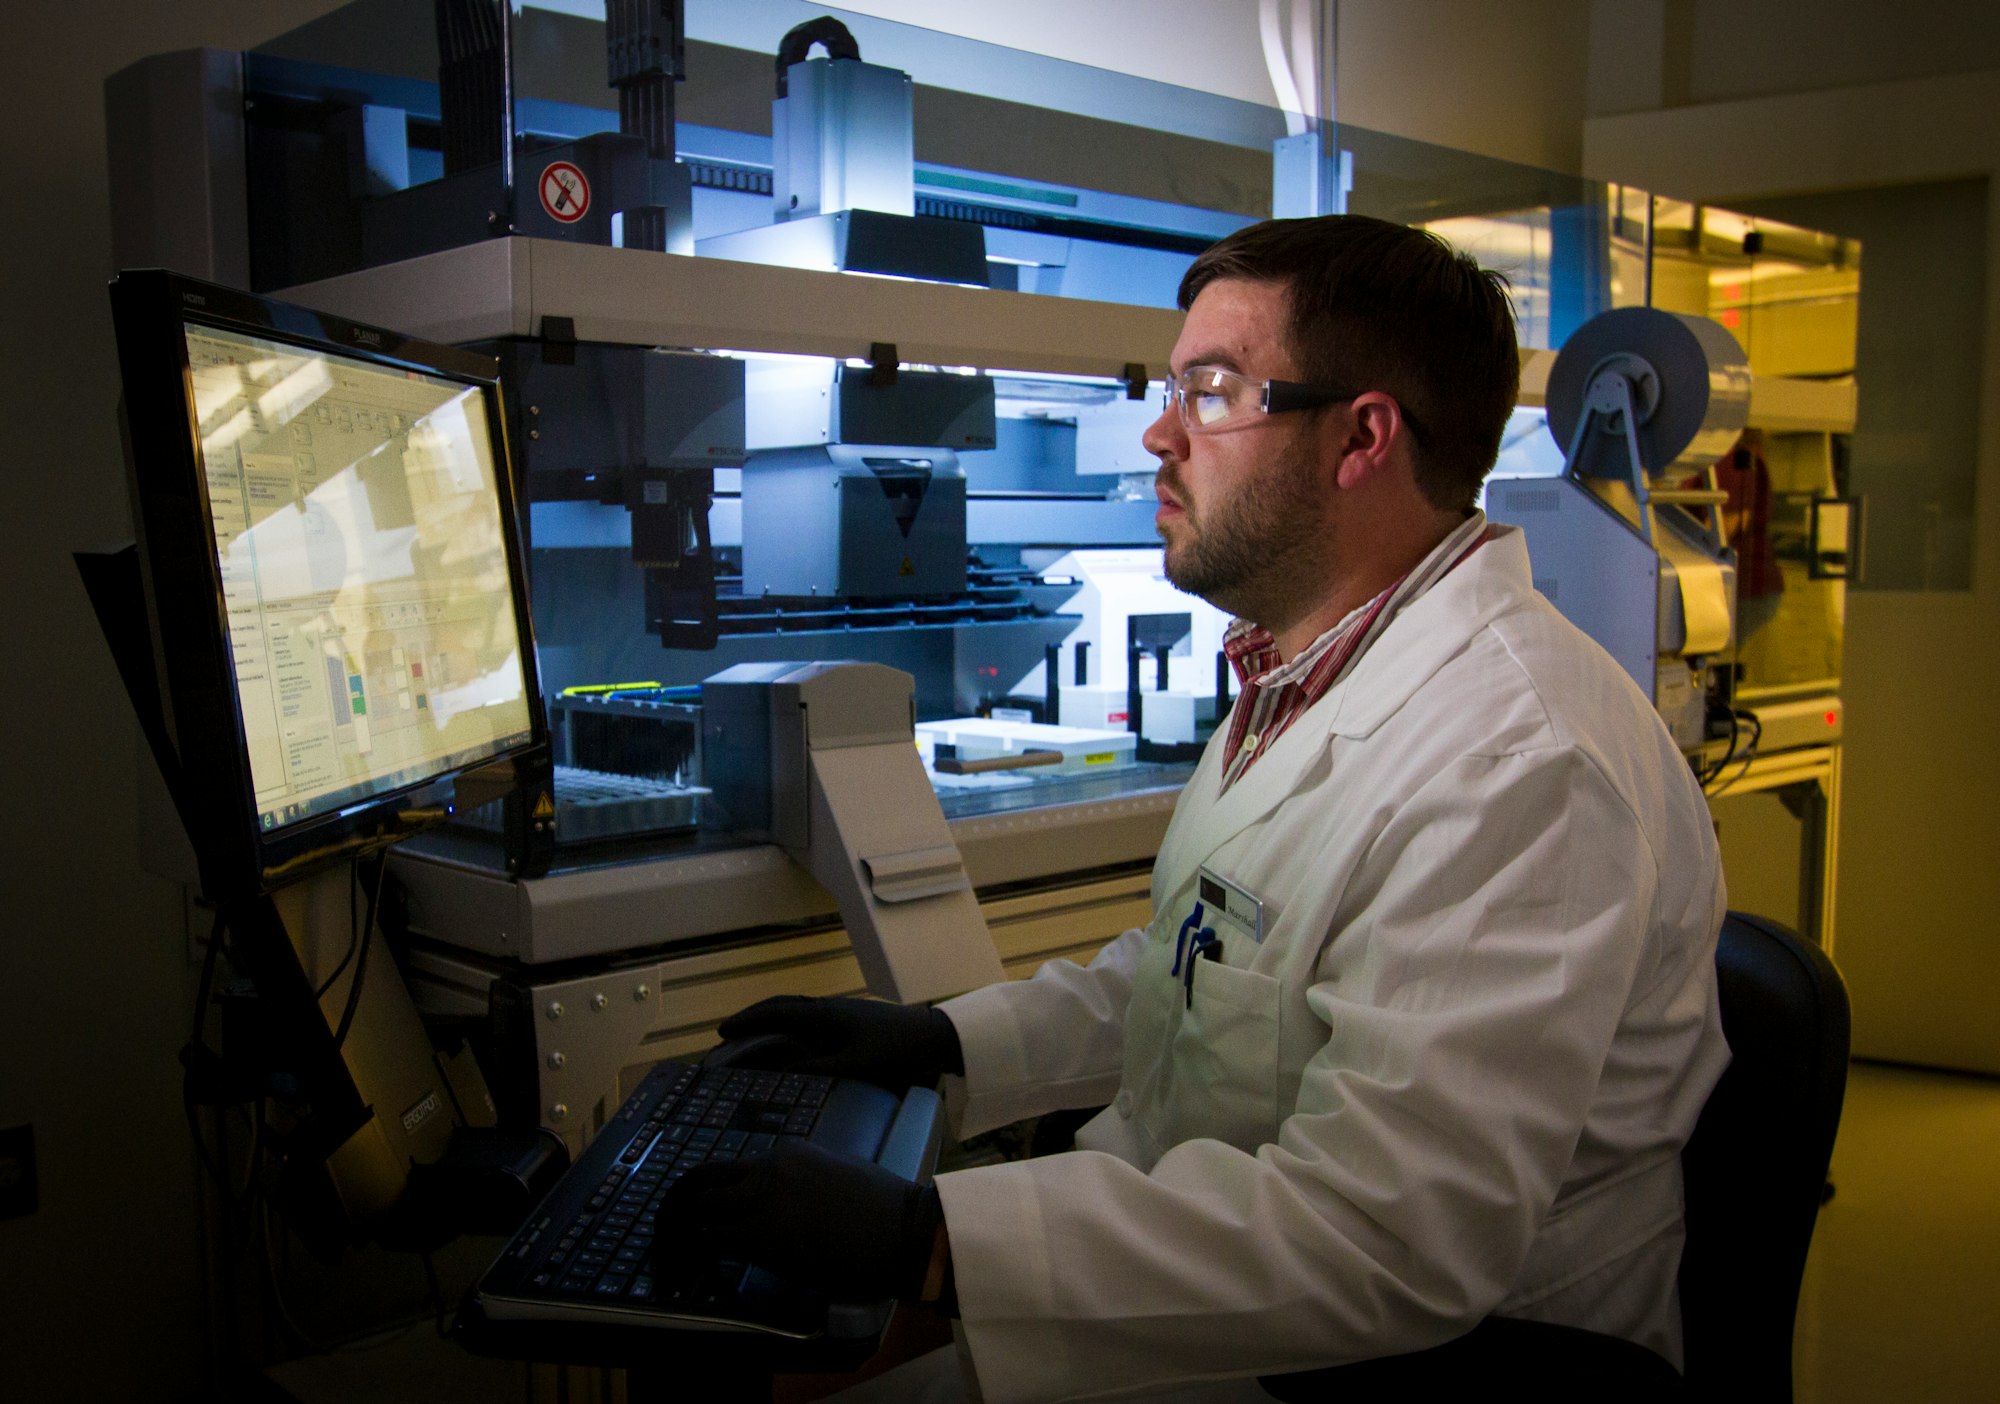 DNA Genotyping and Sequencing. A technician reviews data from high-throughput DNA genotyping and sequencing at the Cancer Genomics Research Laboratory, part of the National Cancer Institute's Division of Cancer Epidemiology and Genetics (DCEG).